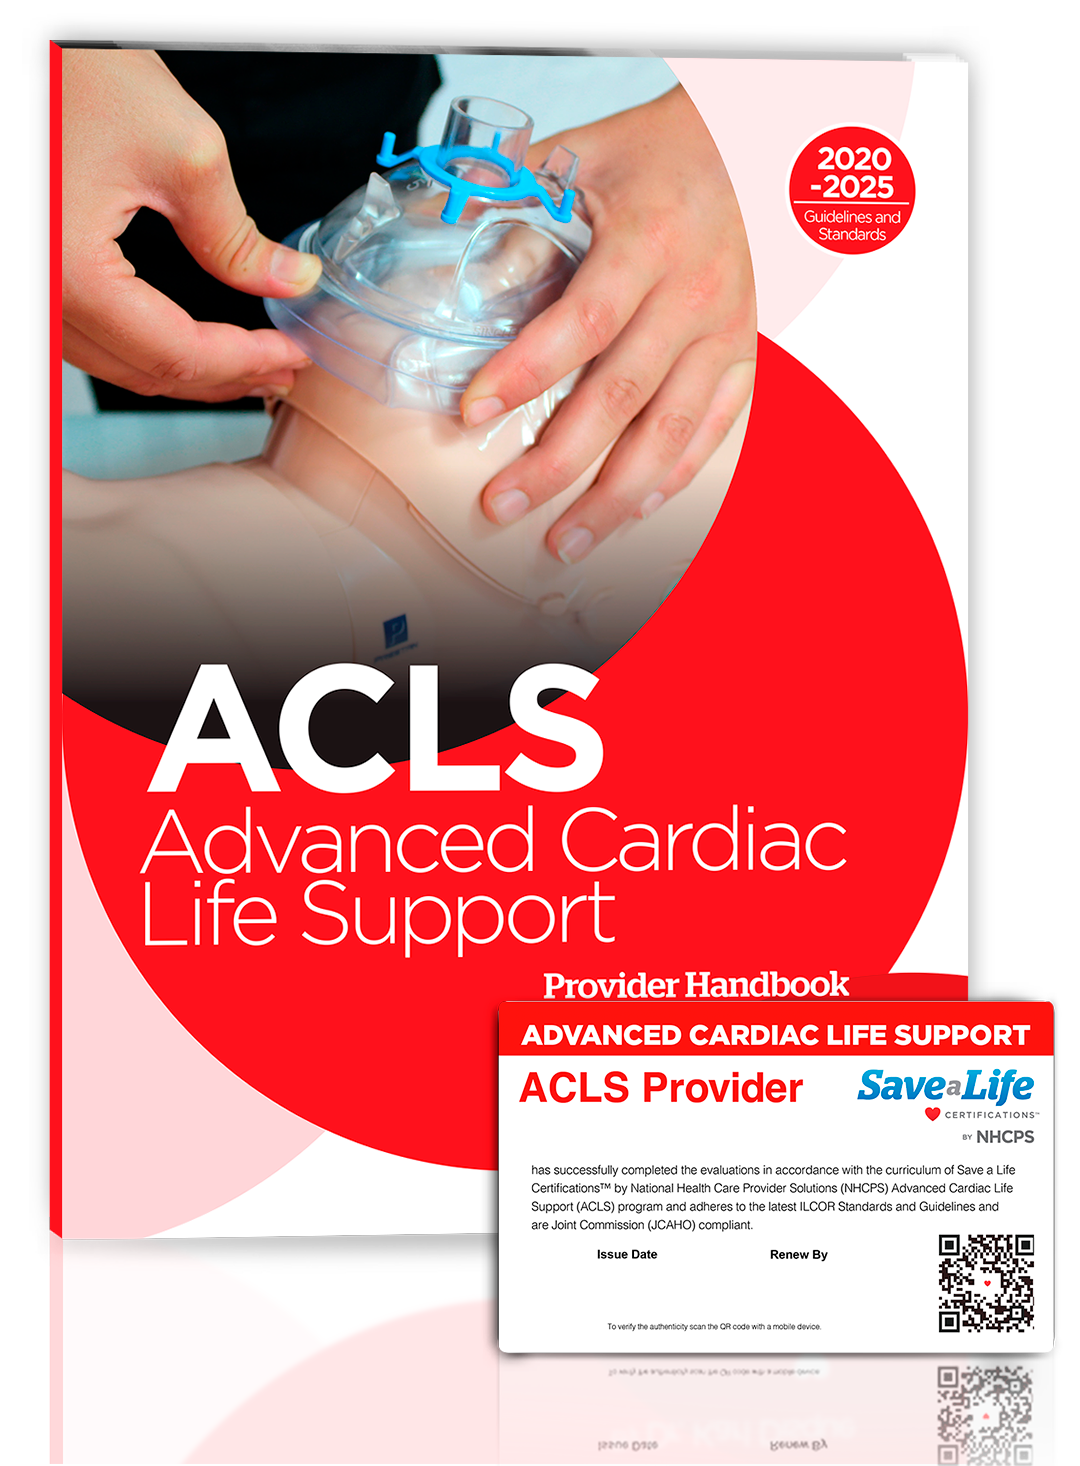 NHCPS Life Saving Certification/Recertification: ACLS, PALS, BLS, CPR & BBP